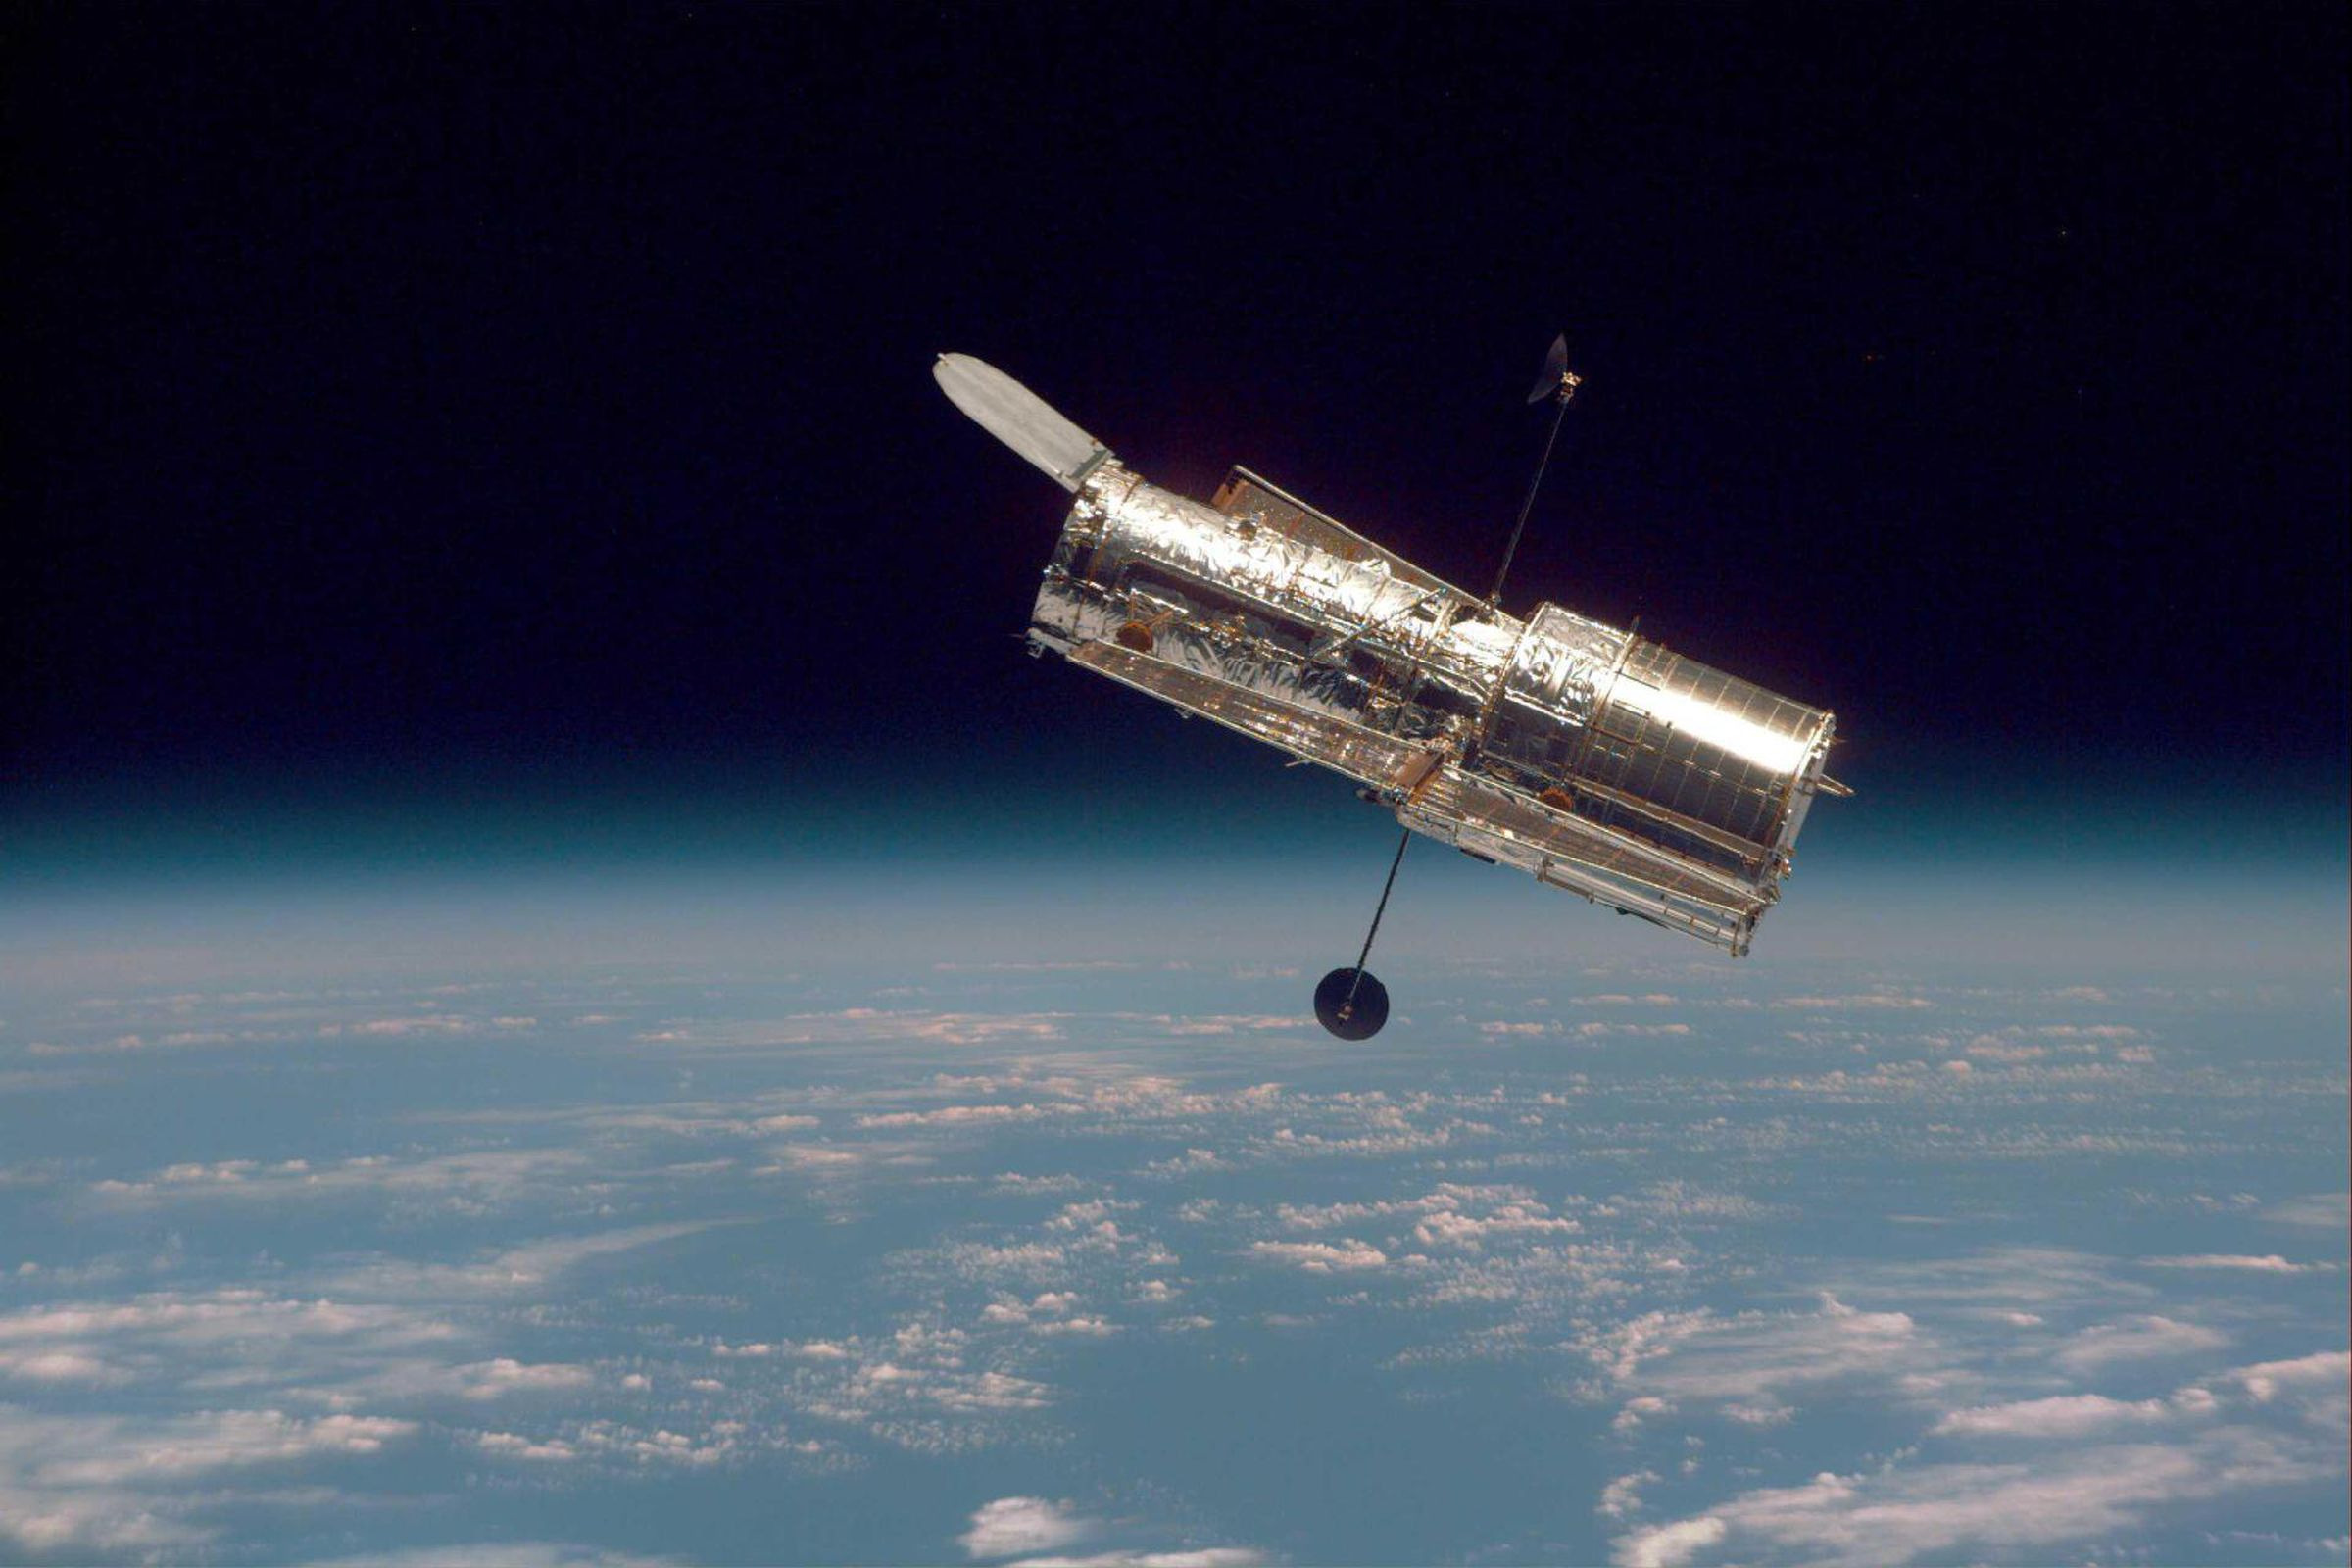 NASA’s Hubble Space Telescope, as seen from Space Shuttle Discovery